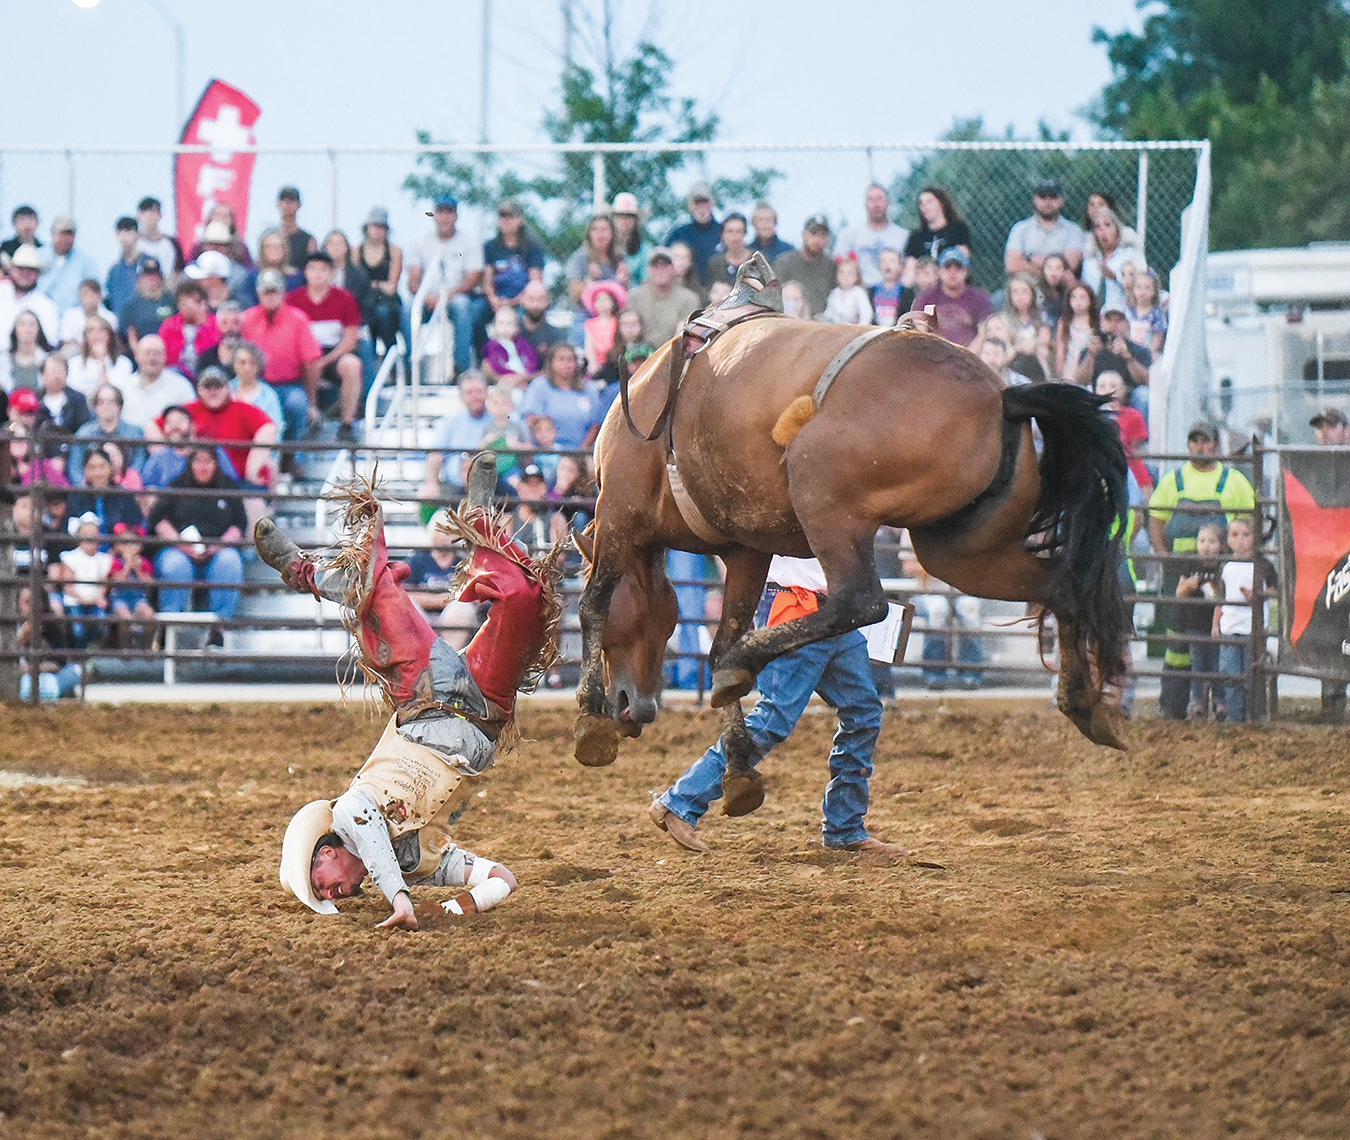 Thrills for the entire family with Lone Star Rodeo SOKY Happenings